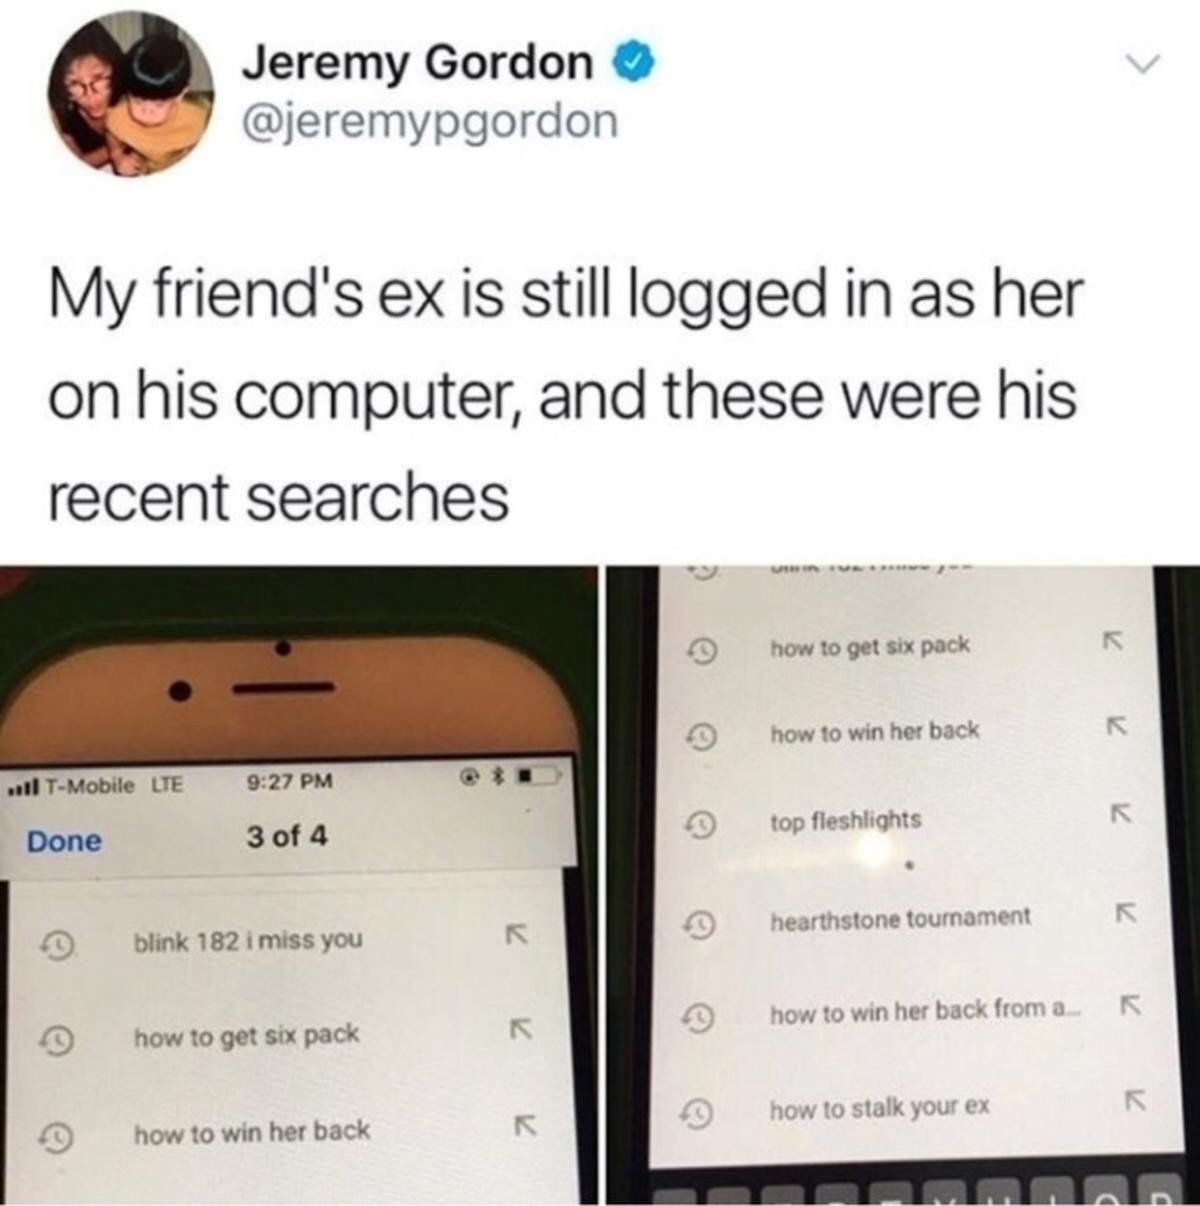 cringy posts on social media - Jeremy Gordon My friend's ex is still logged in as her on his computer, and these were his recent searches how to get six pack how to win her back ...1 TMobile Lte 3 of 4 top fleshlights Done hearthstone tournament 7 blink 1